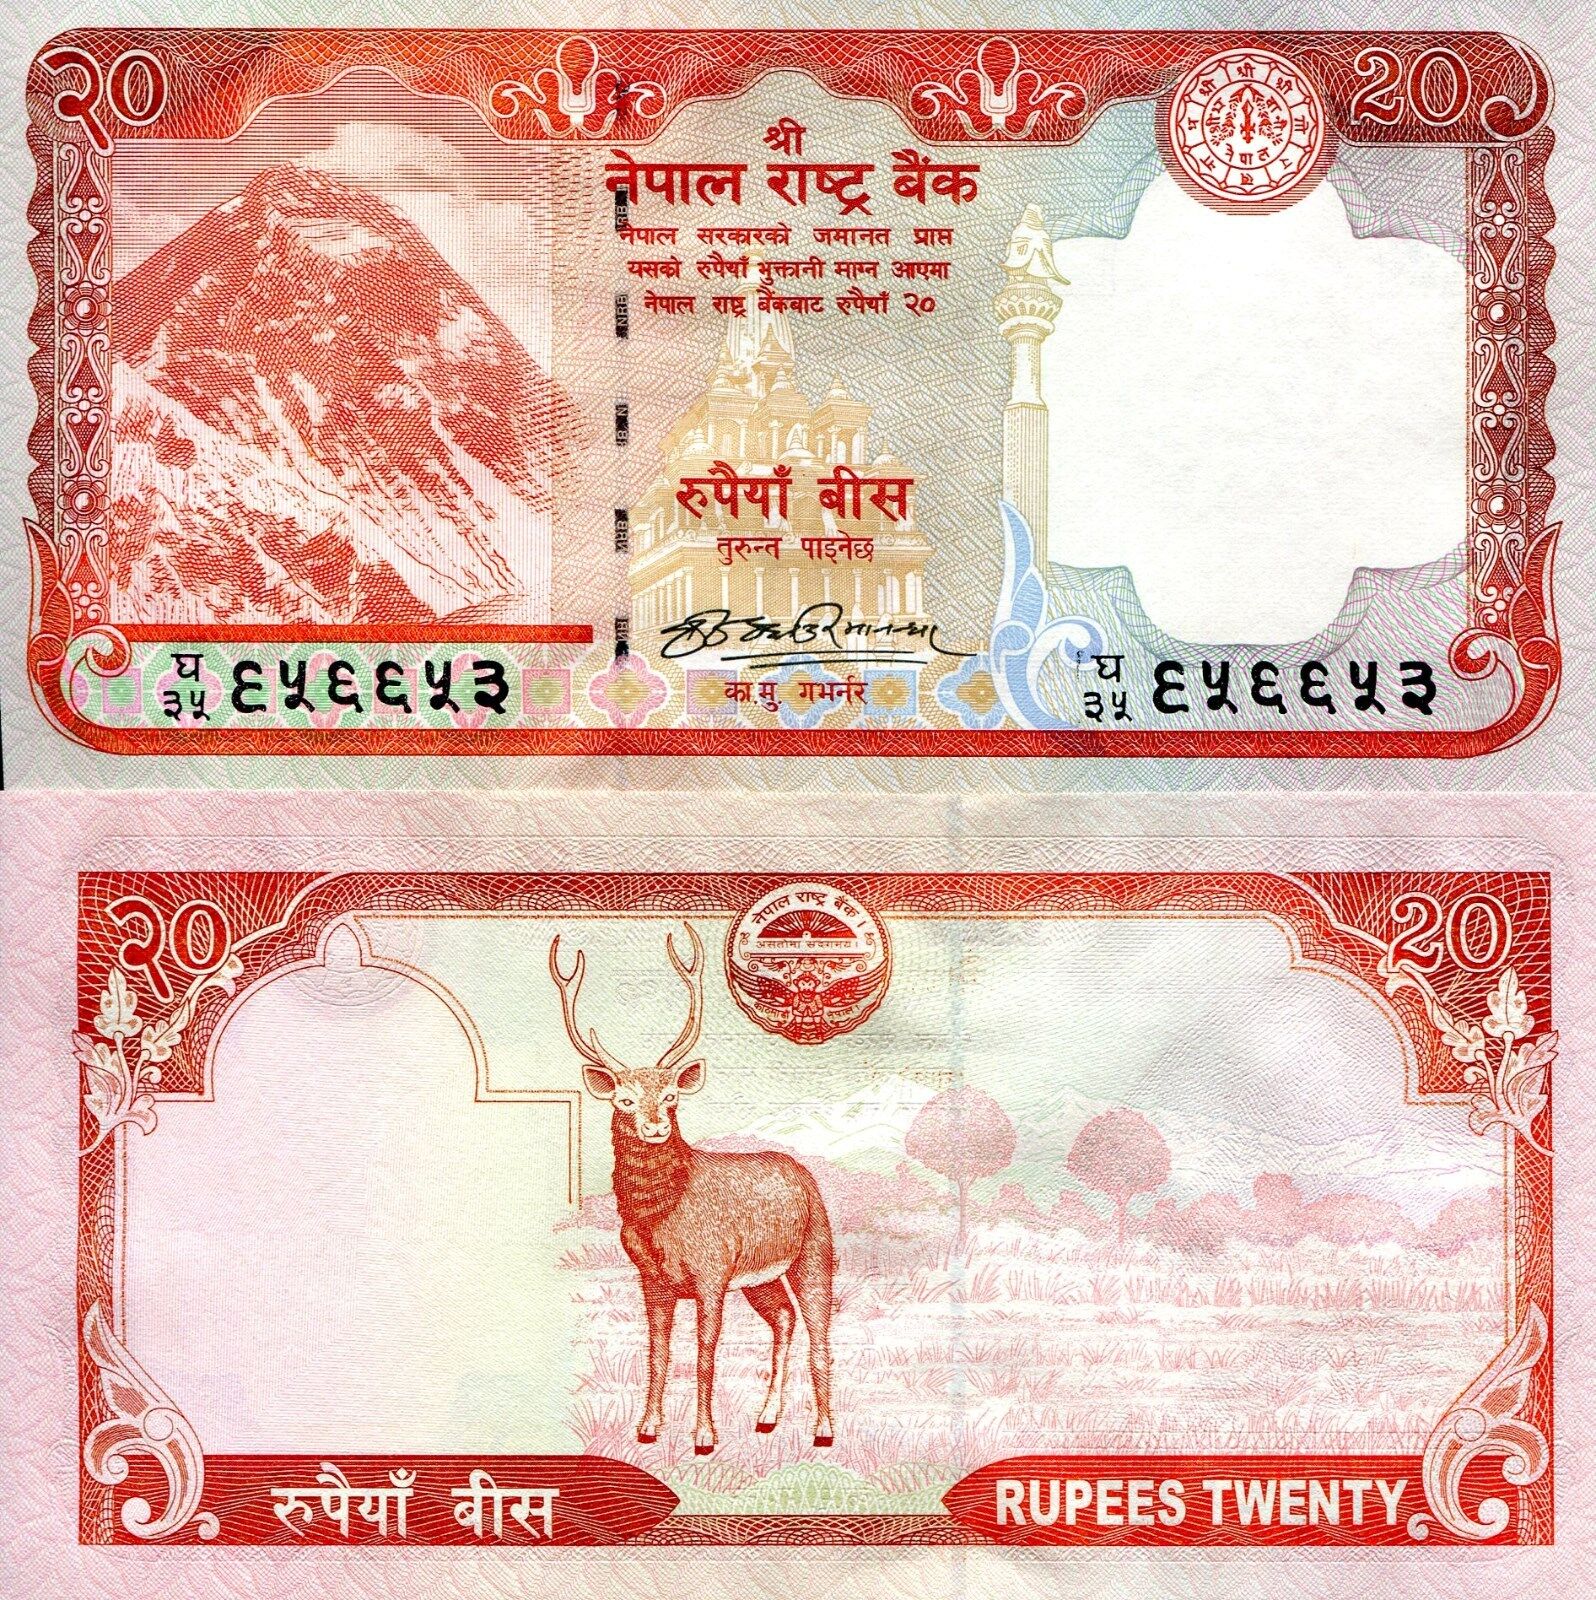 NEPAL 20 Rupees Banknote World Paper Money UNC Currency Pick p62a Everest &  Deer | eBay